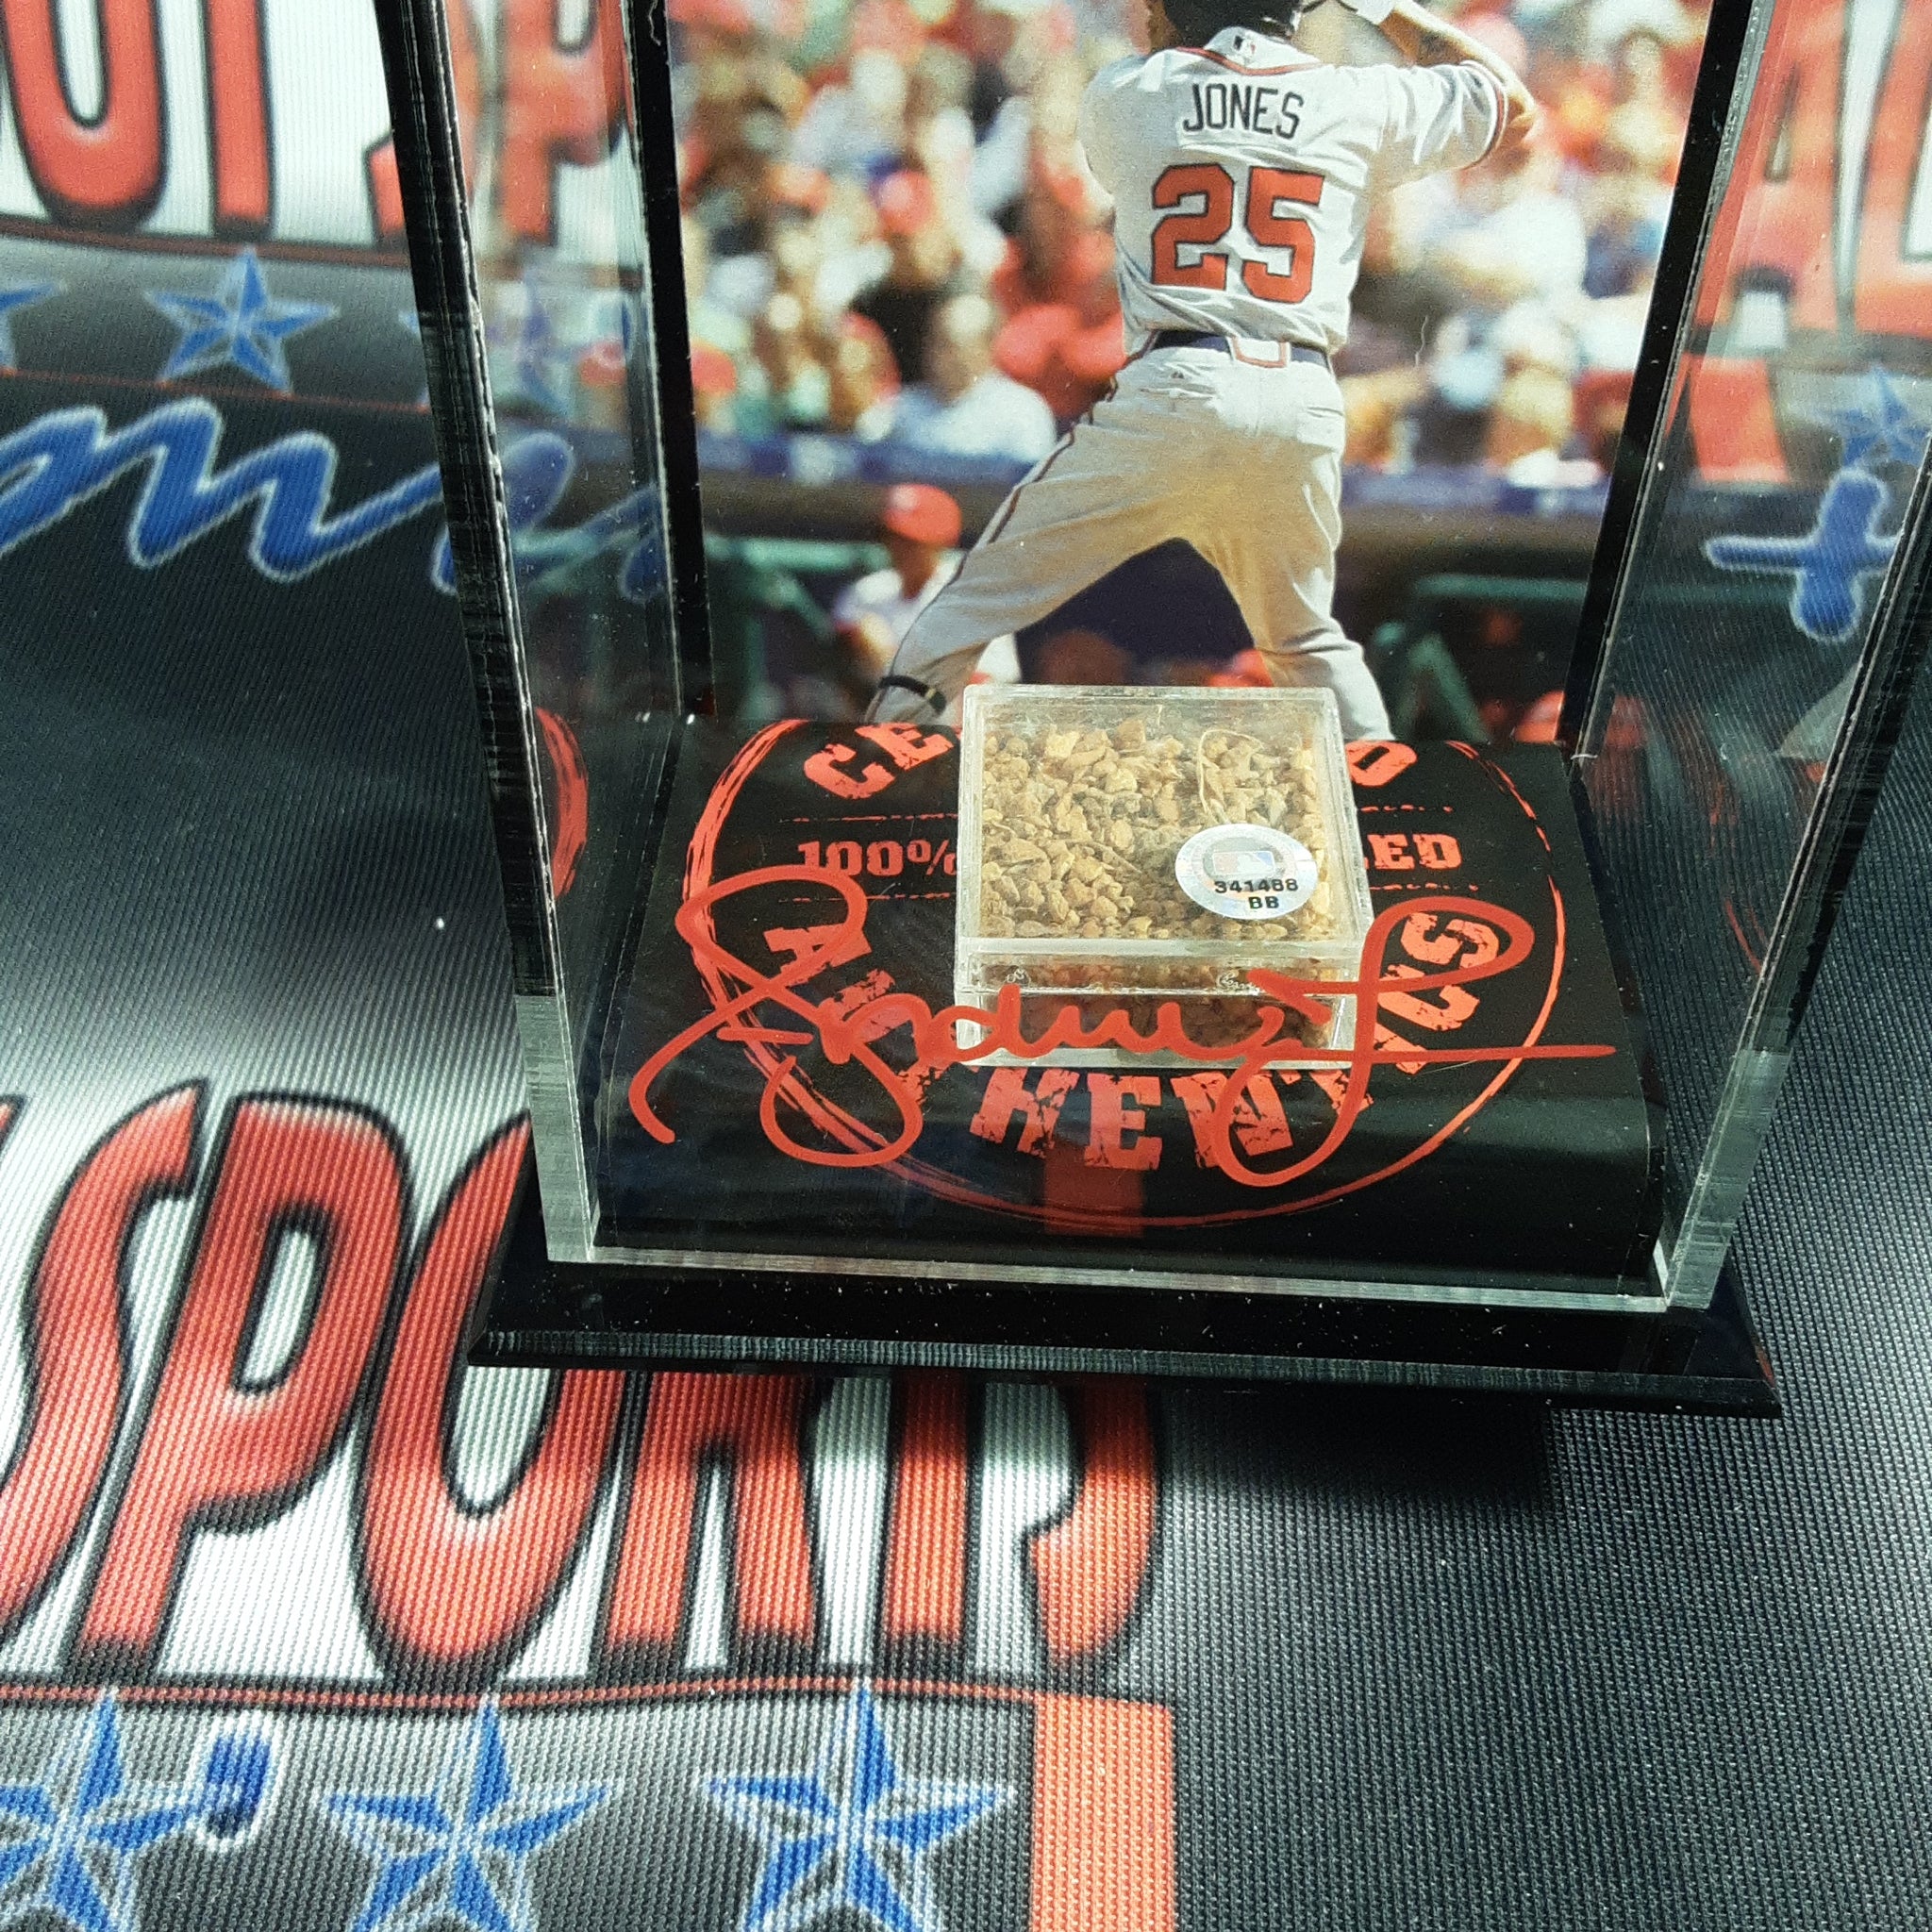 Andruw Jones Authentic Signed Game Used Dirt Autographed JSA.